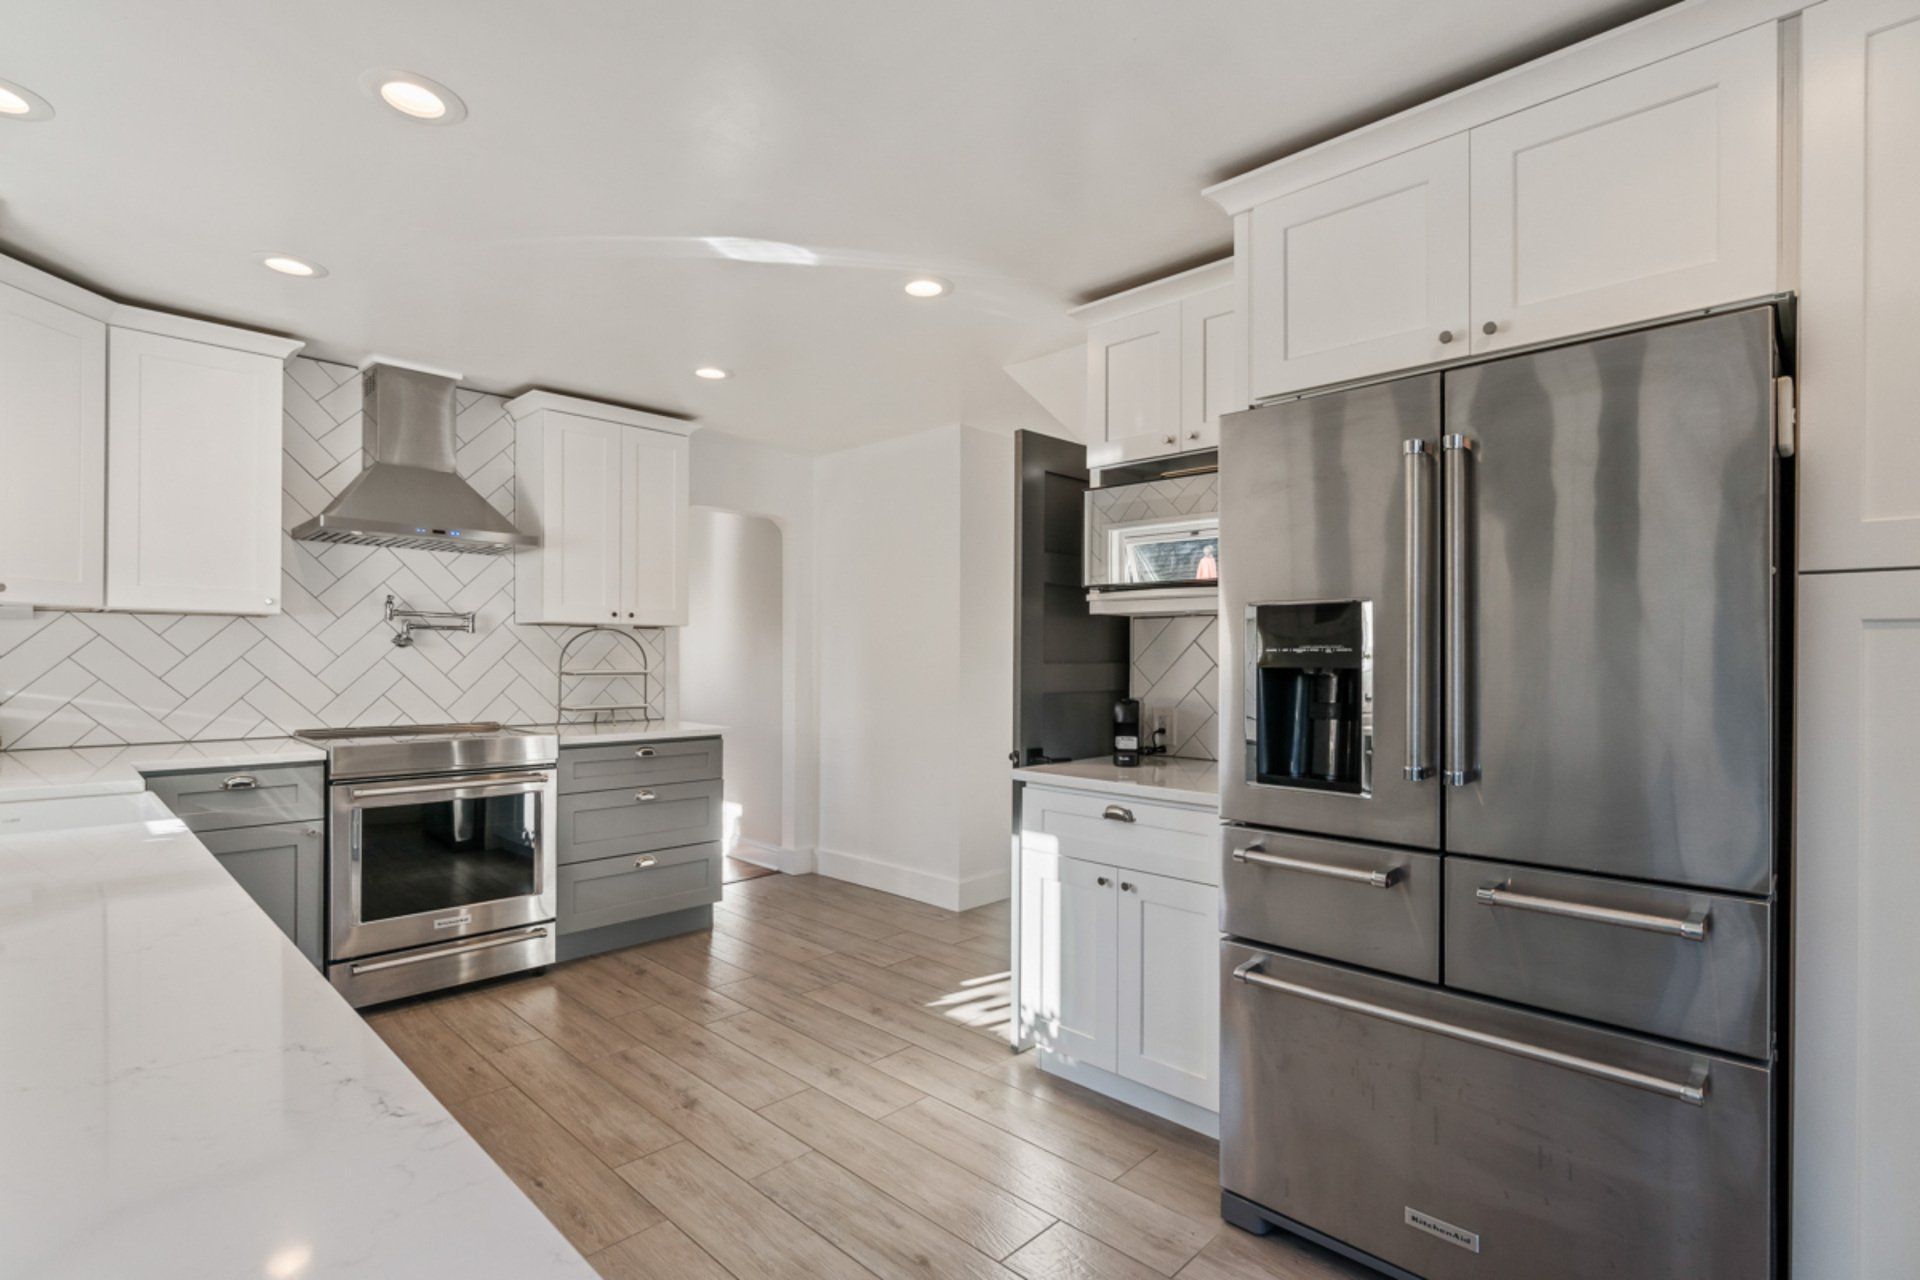 A kitchen with stainless steel appliances and white cabinets